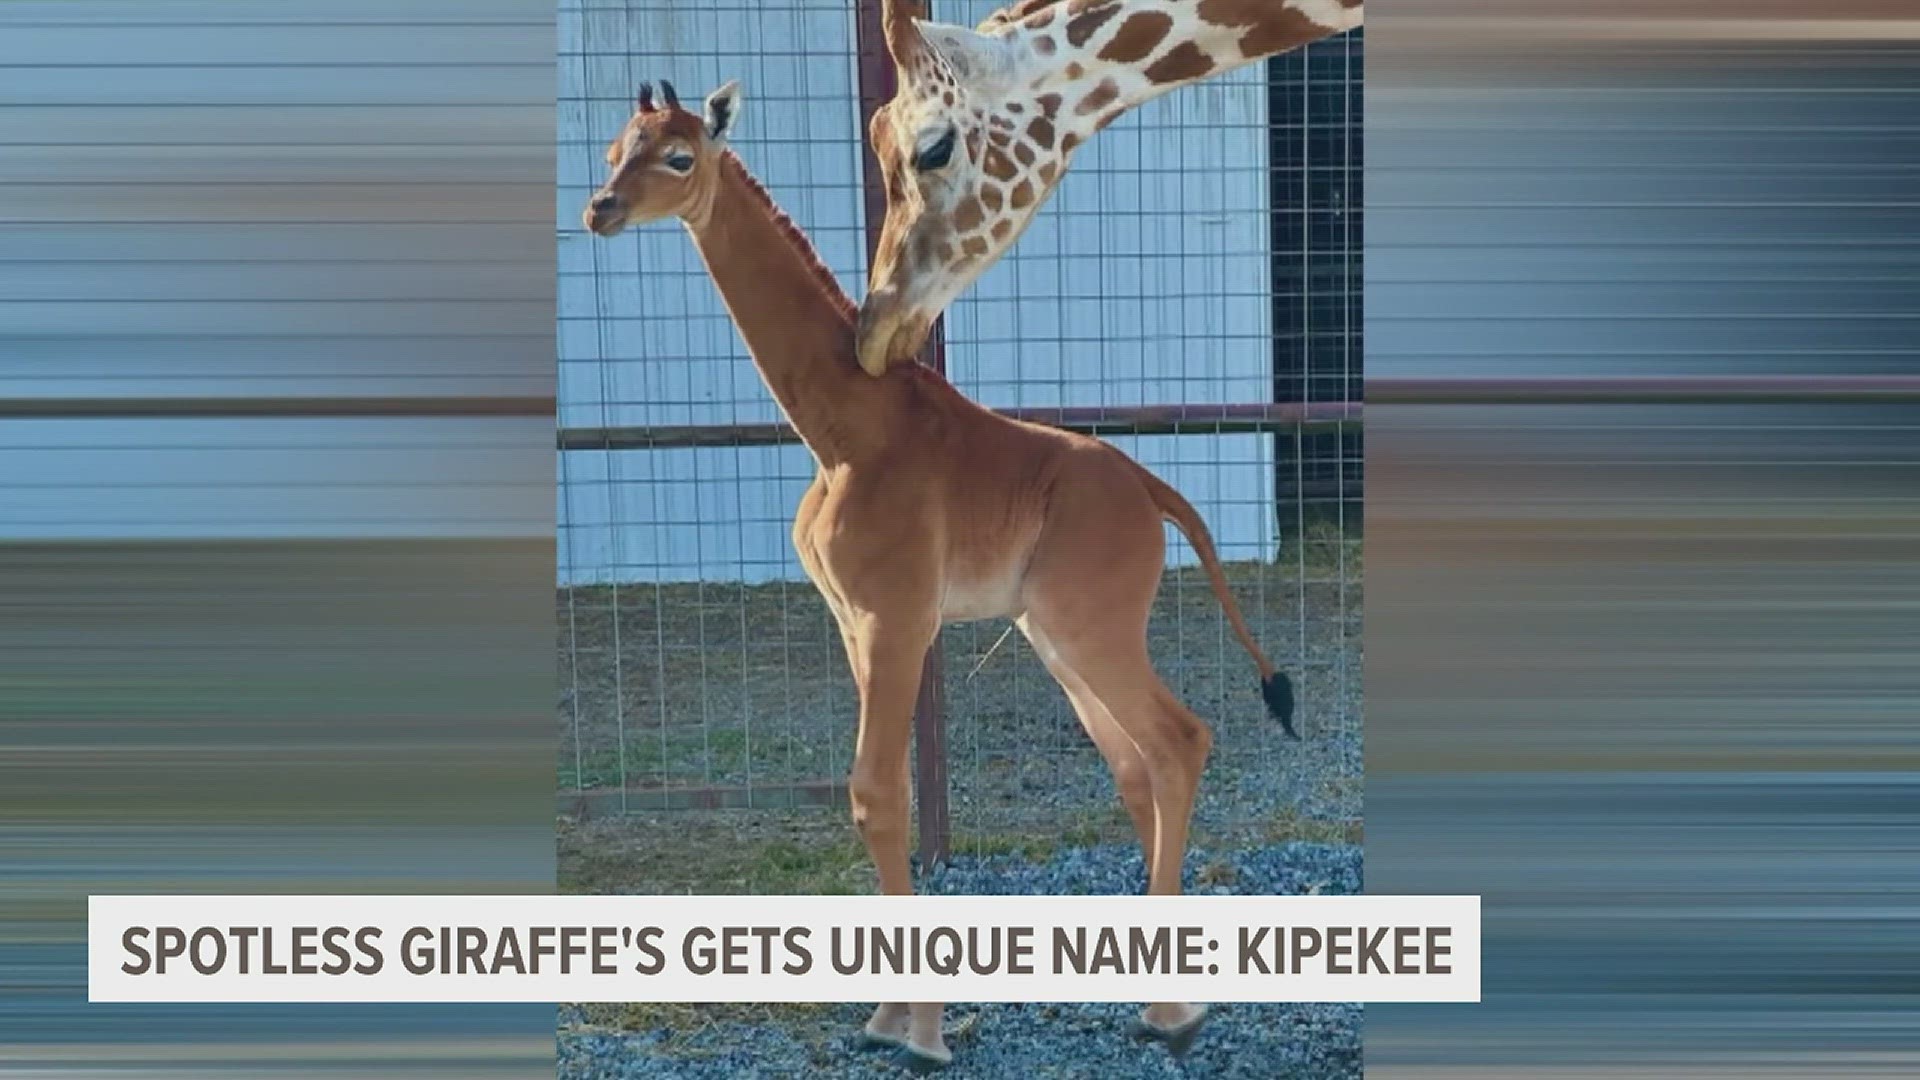 Experts believe the newly-named Kipekee is the only spotless giraffe in the world.